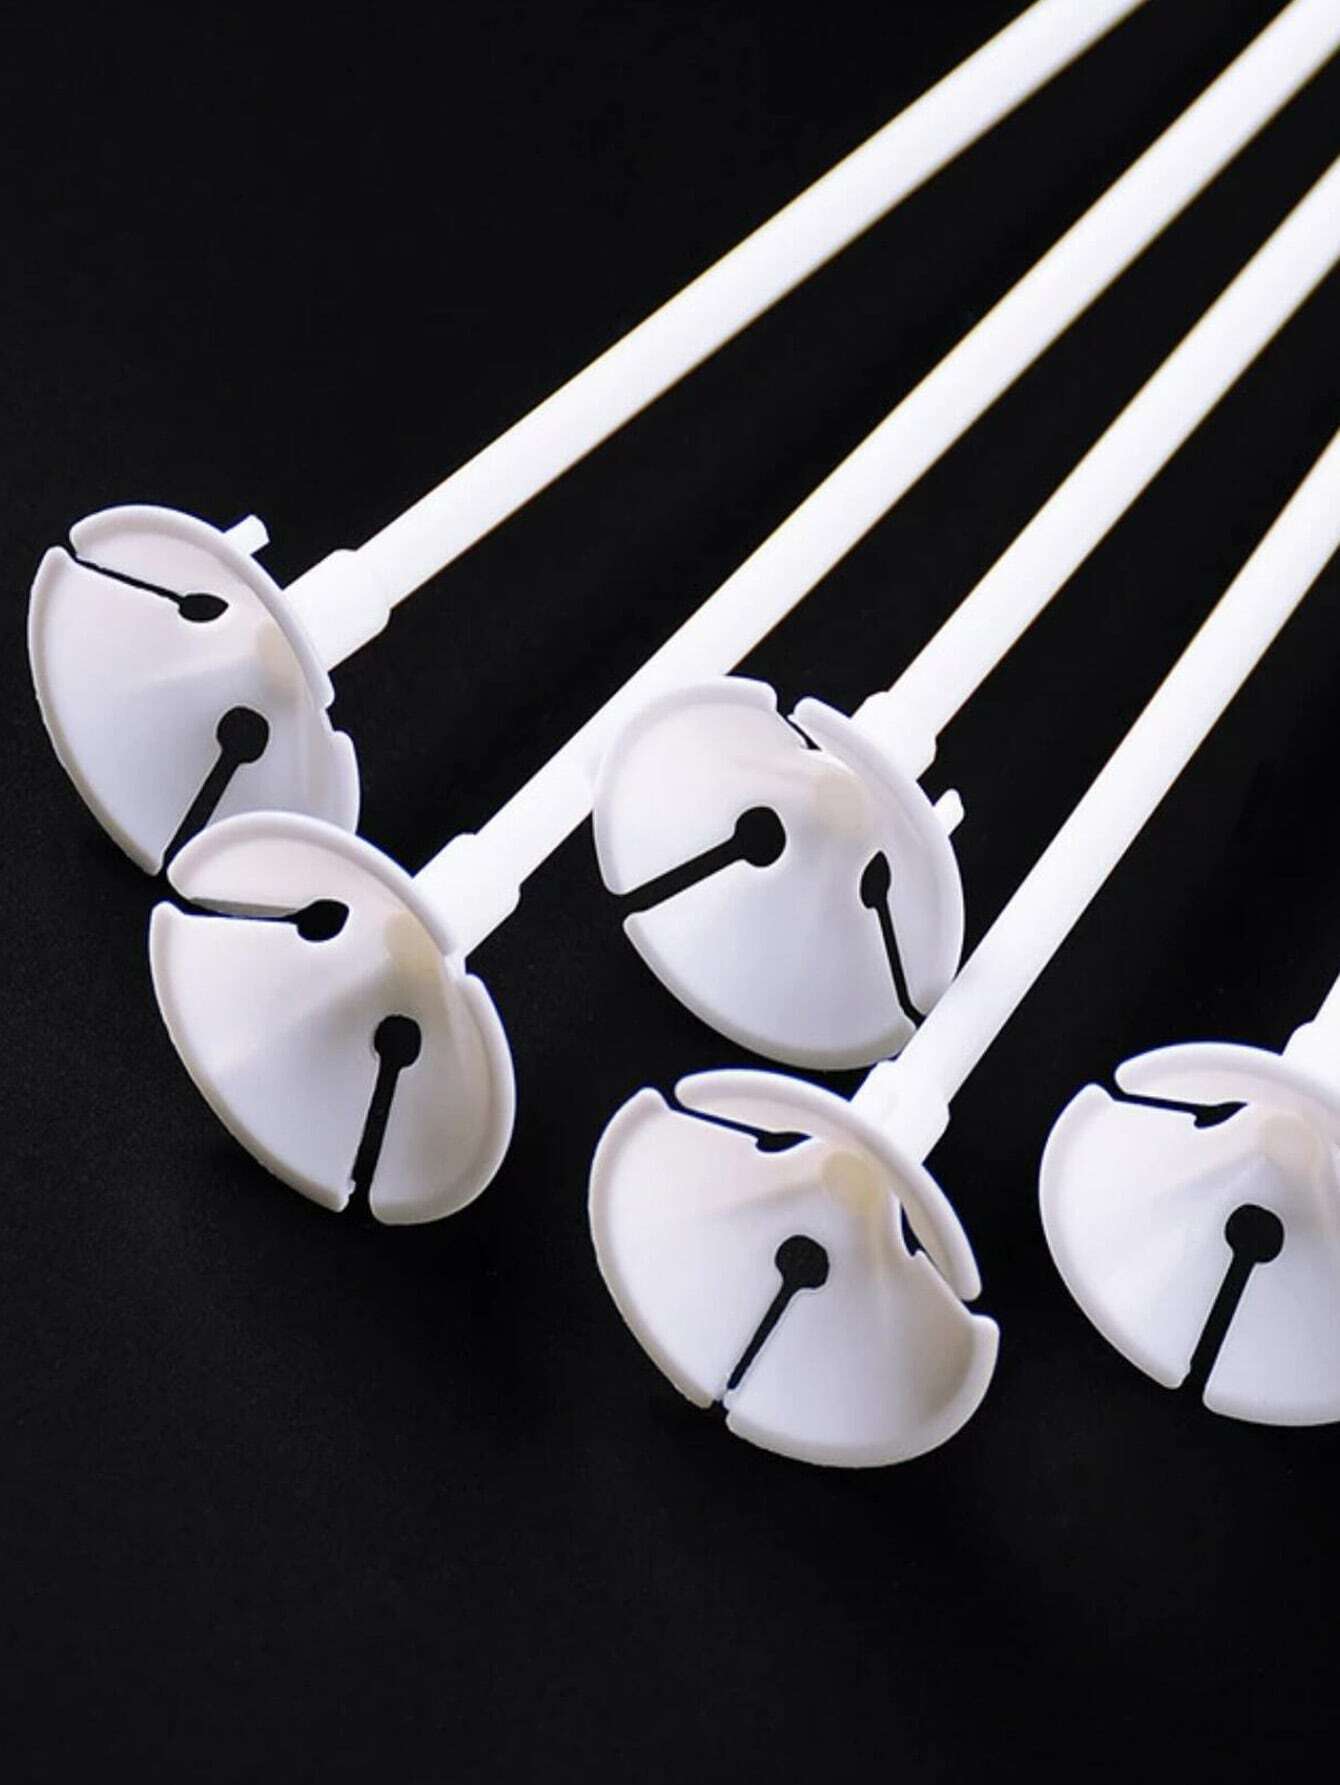 🔥Factory overstock - 10pcs  32cm  Latex  Balloon  Stick  White  Balloons  Holder  Sticks  With  Cup  Wedding  Birthday  Party  Inflatable  Balls  Decoration  Accessories